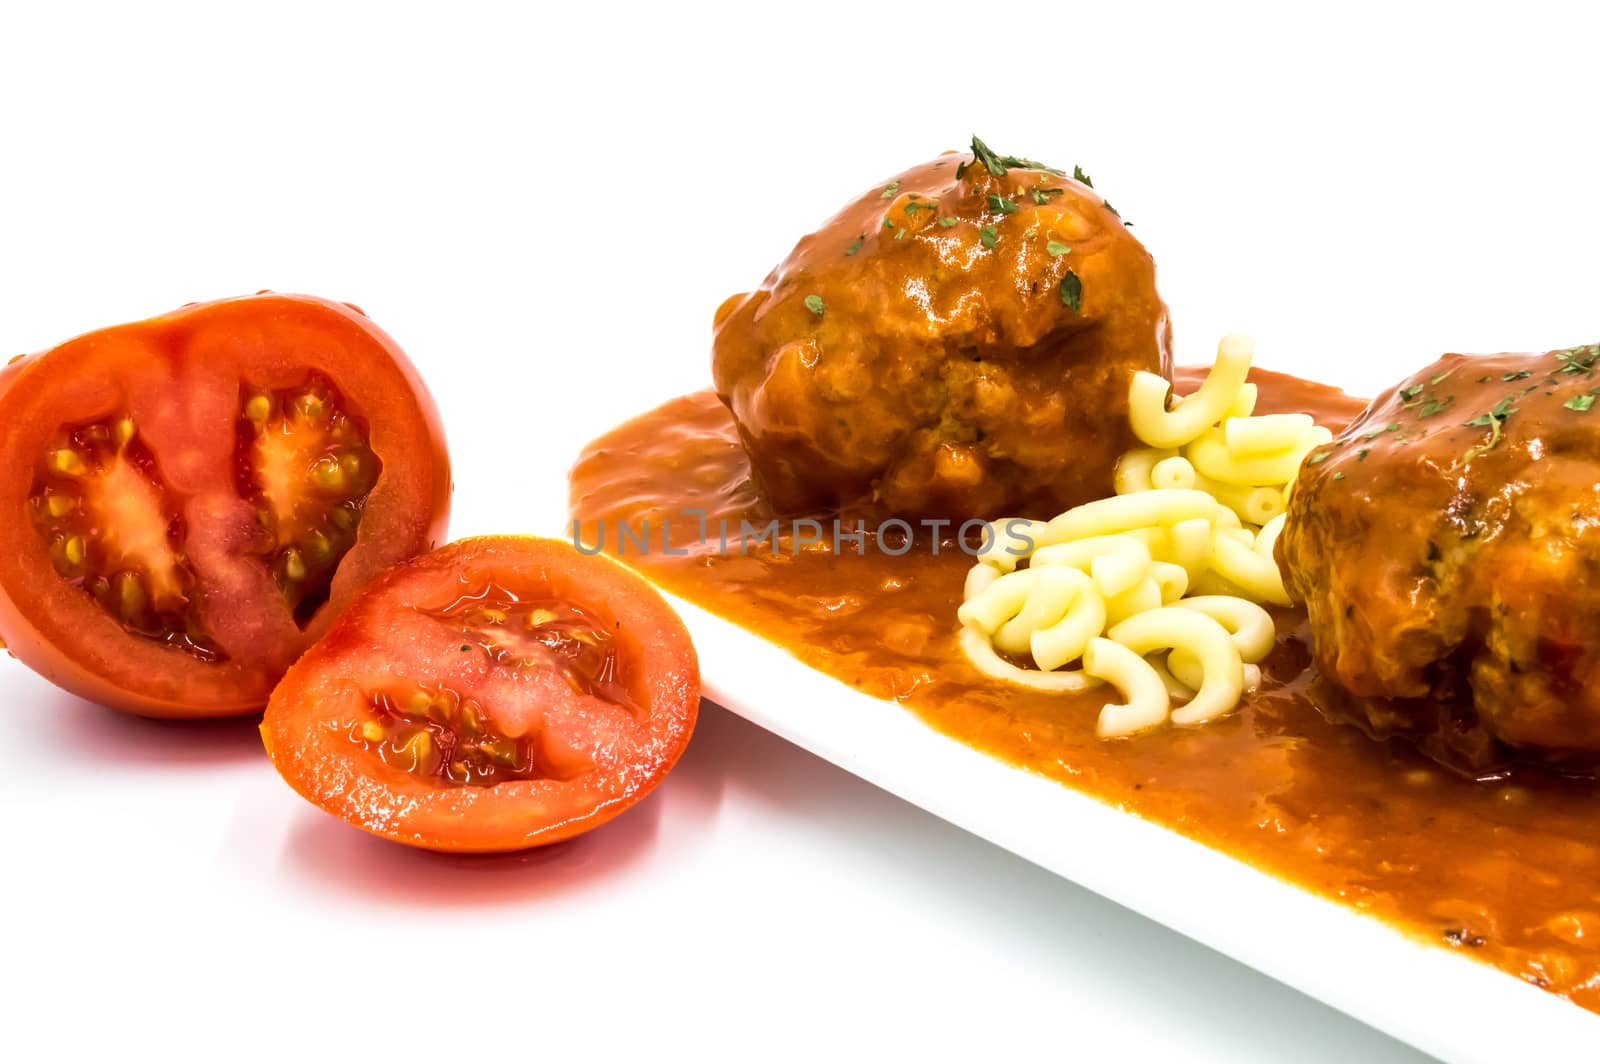 Meatballs cooked in tomato sauce with small pasta  by Philou1000